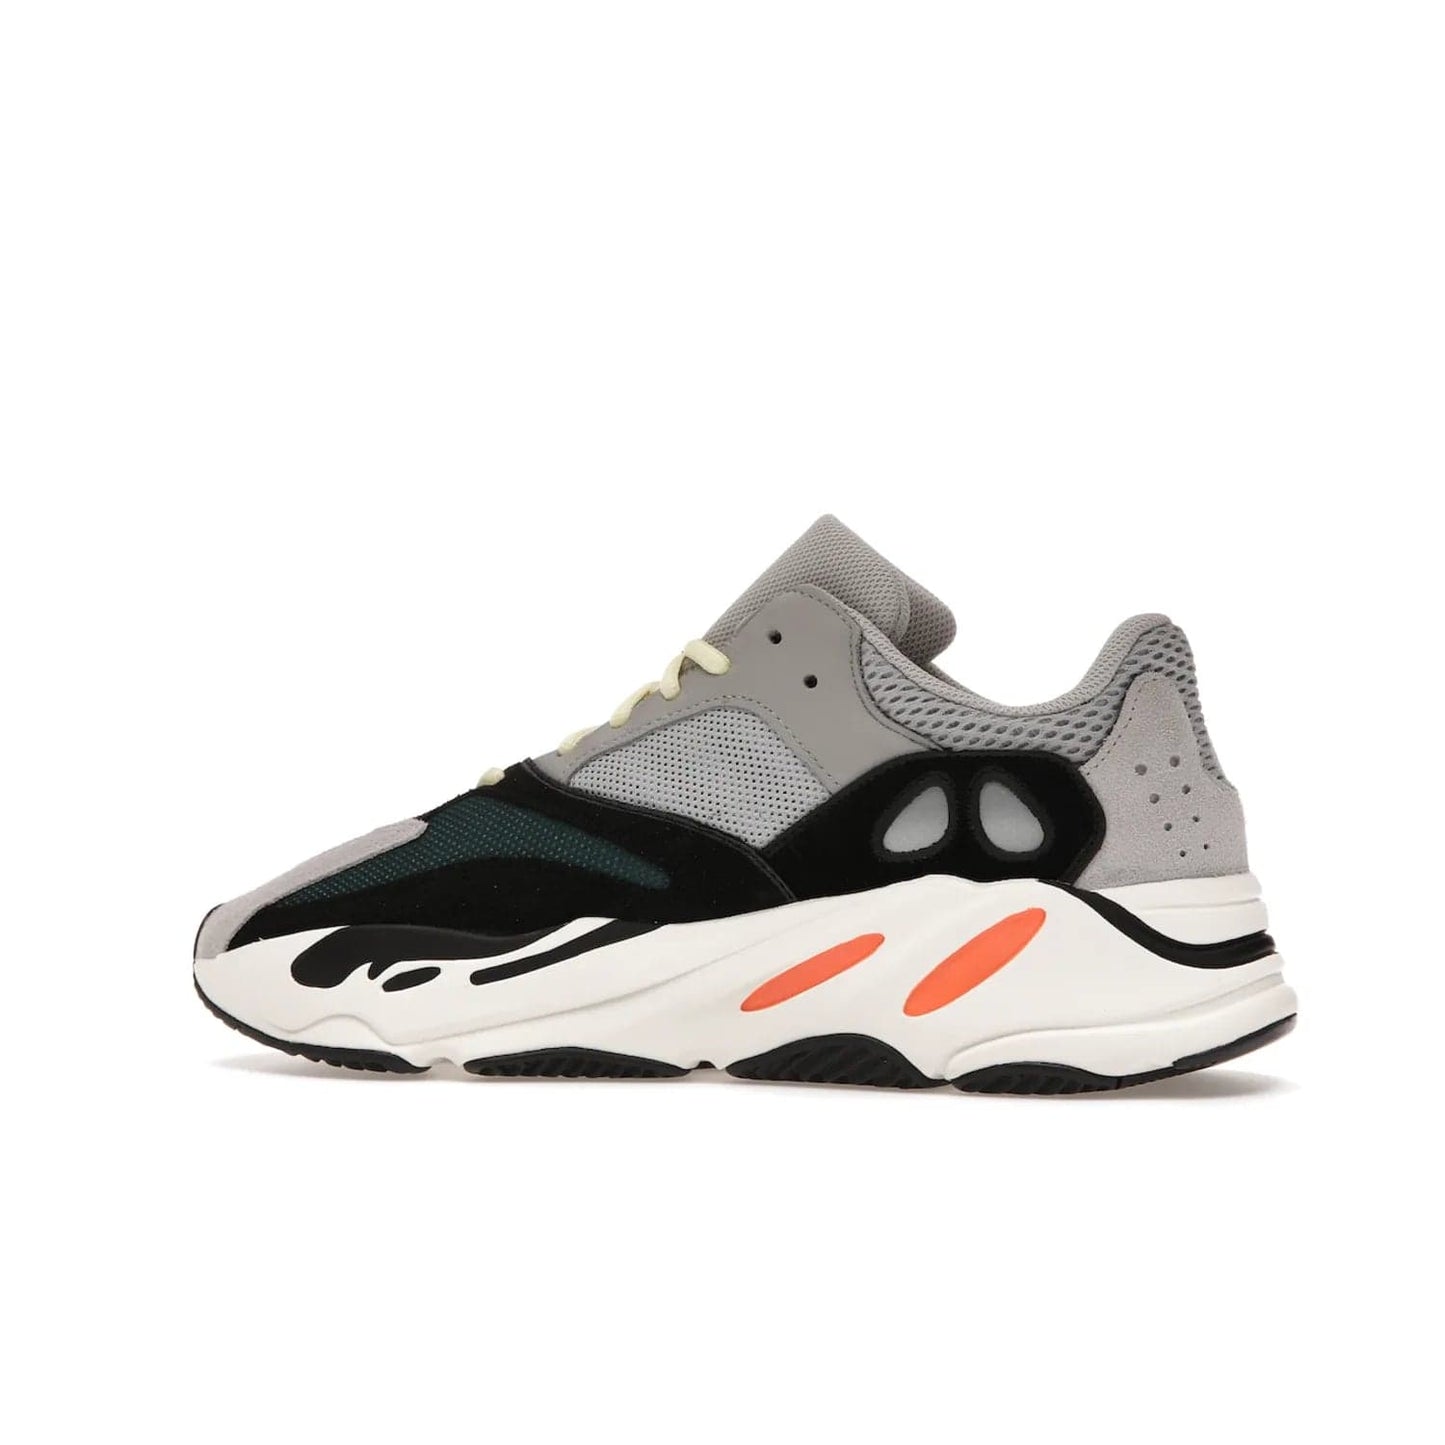 adidas Yeezy Boost 700 Wave Runner - Image 21 - Only at www.BallersClubKickz.com - Shop the iconic adidas Yeezy Boost 700 Wave Runner. Featuring grey mesh and leather upper, black suede overlays, teal mesh underlays, and signature Boost sole. Be bold & make a statement.